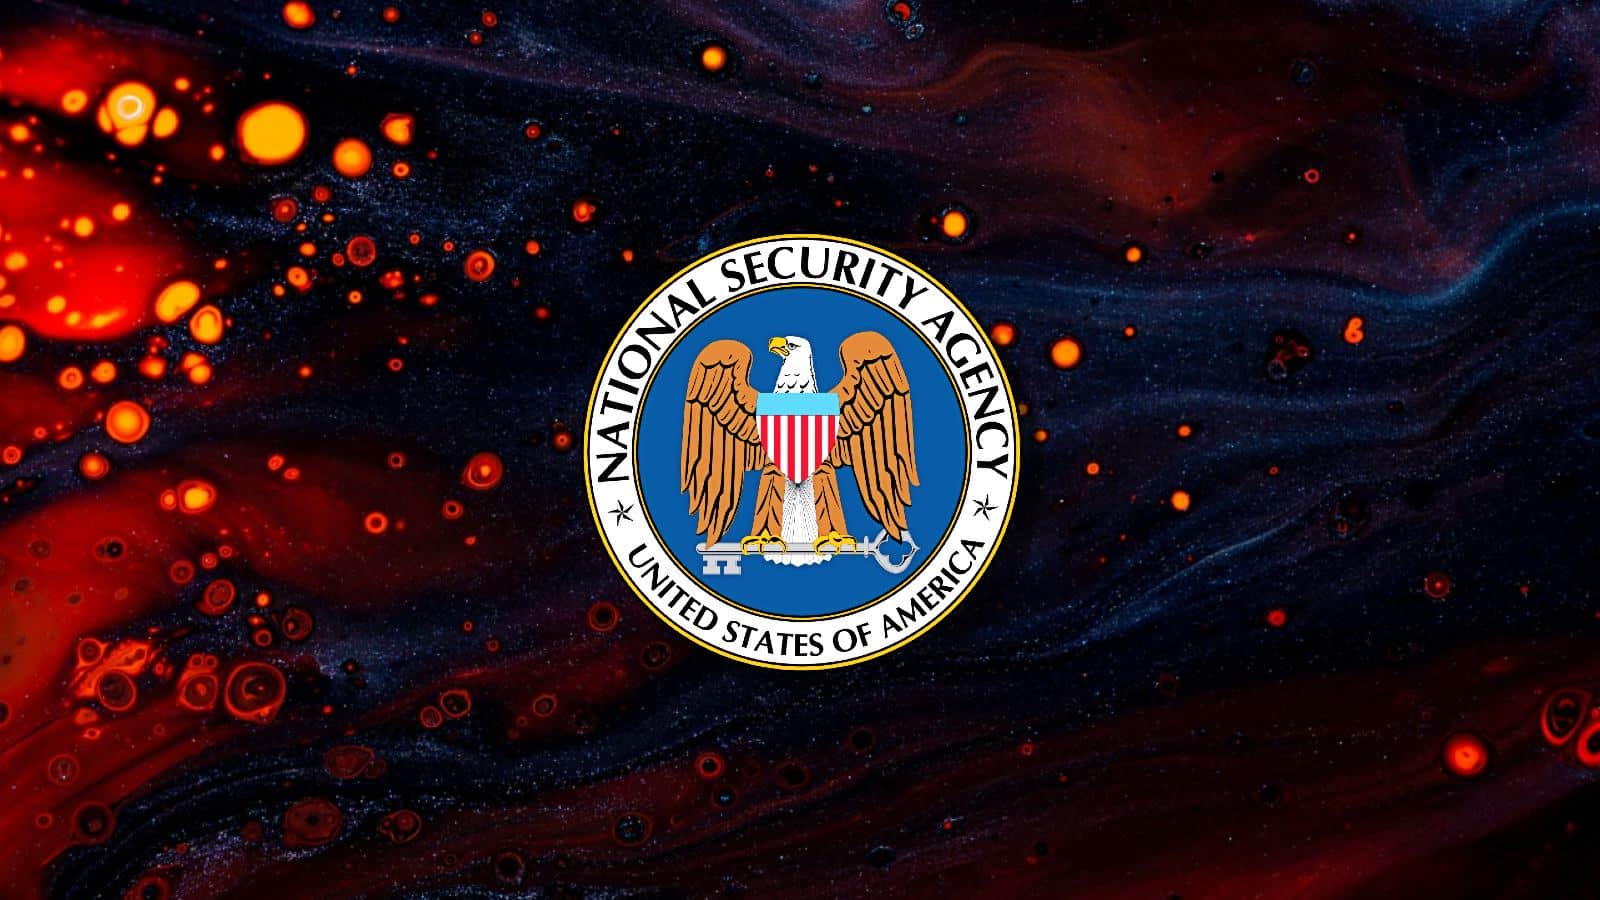 NSA shares guidance to help secure OT/ICS critical infrastructure